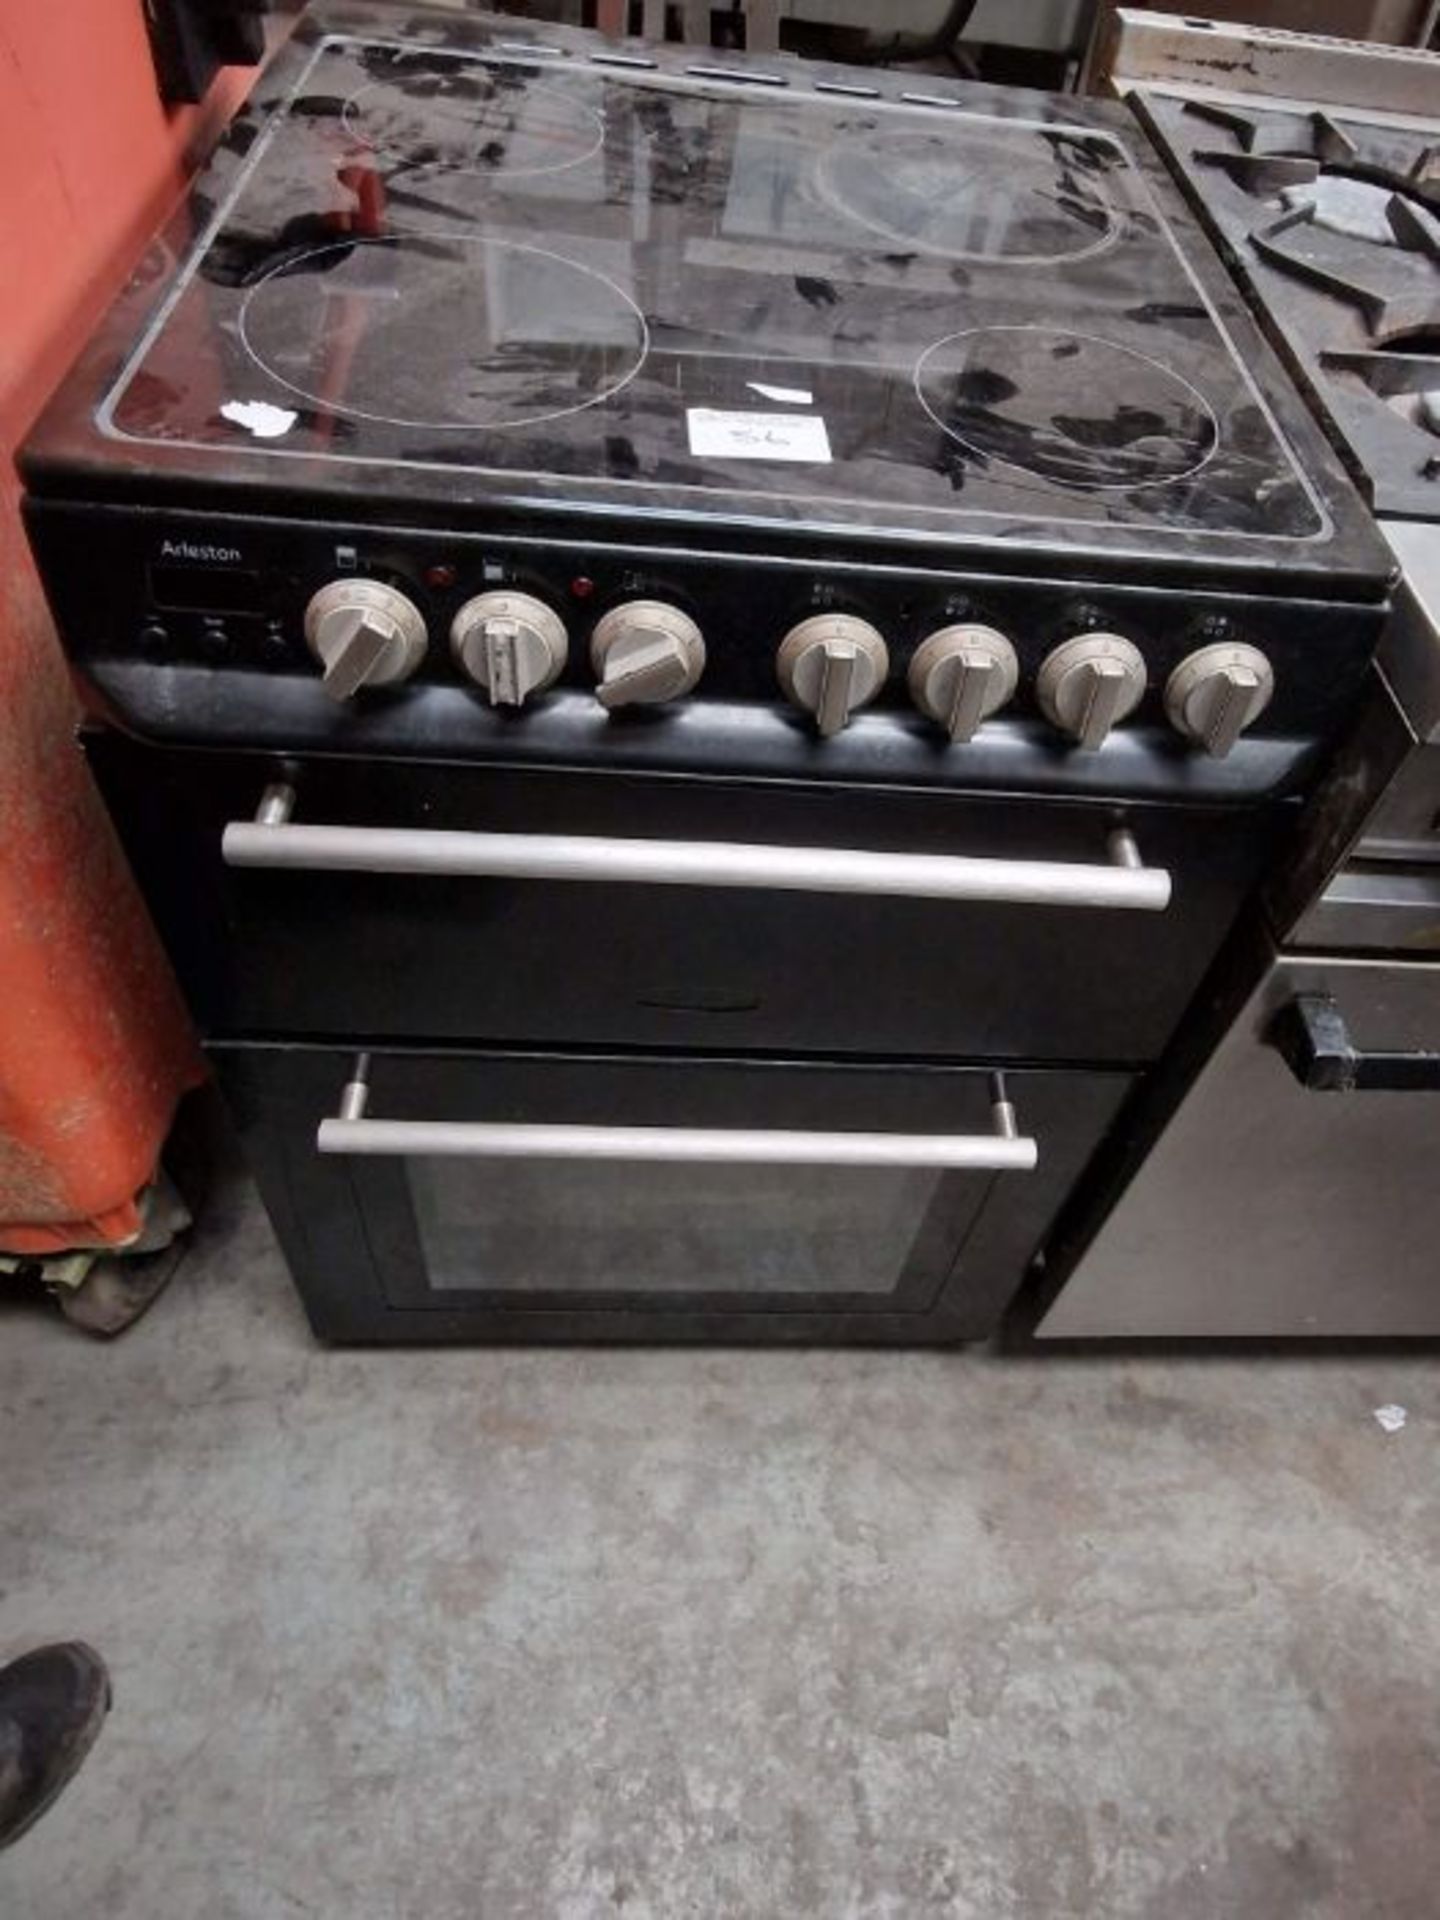 Arleston 4 ring cooker and grill.